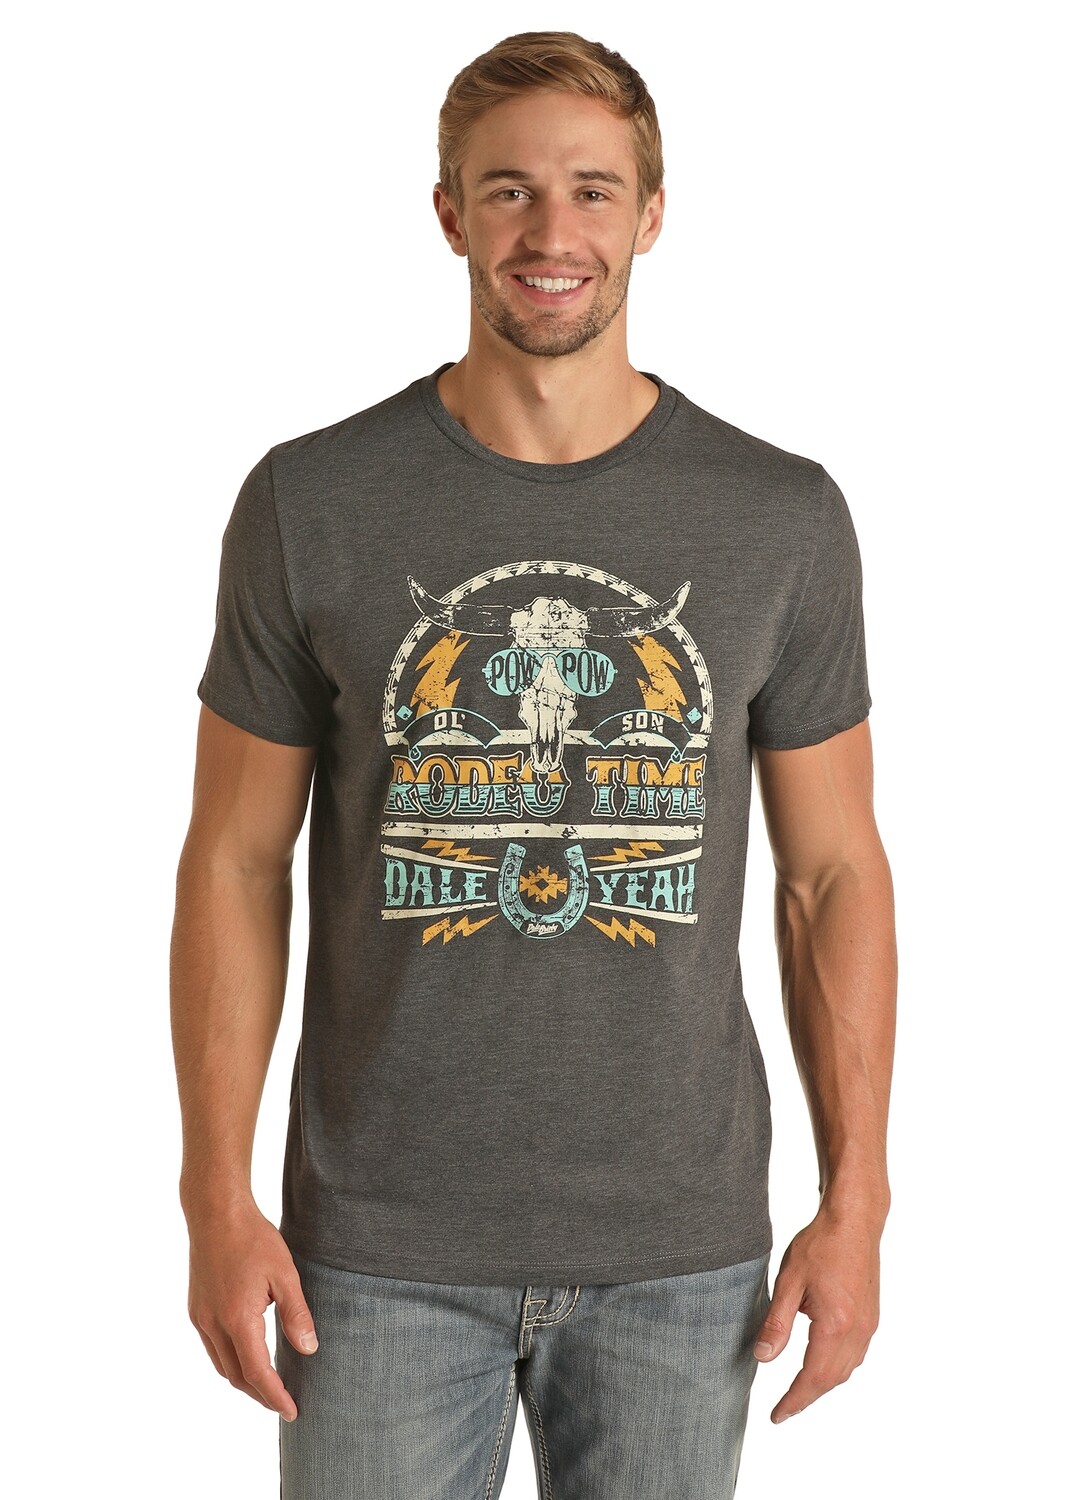 DALE BRISBY RODEO TIME TSHIRT